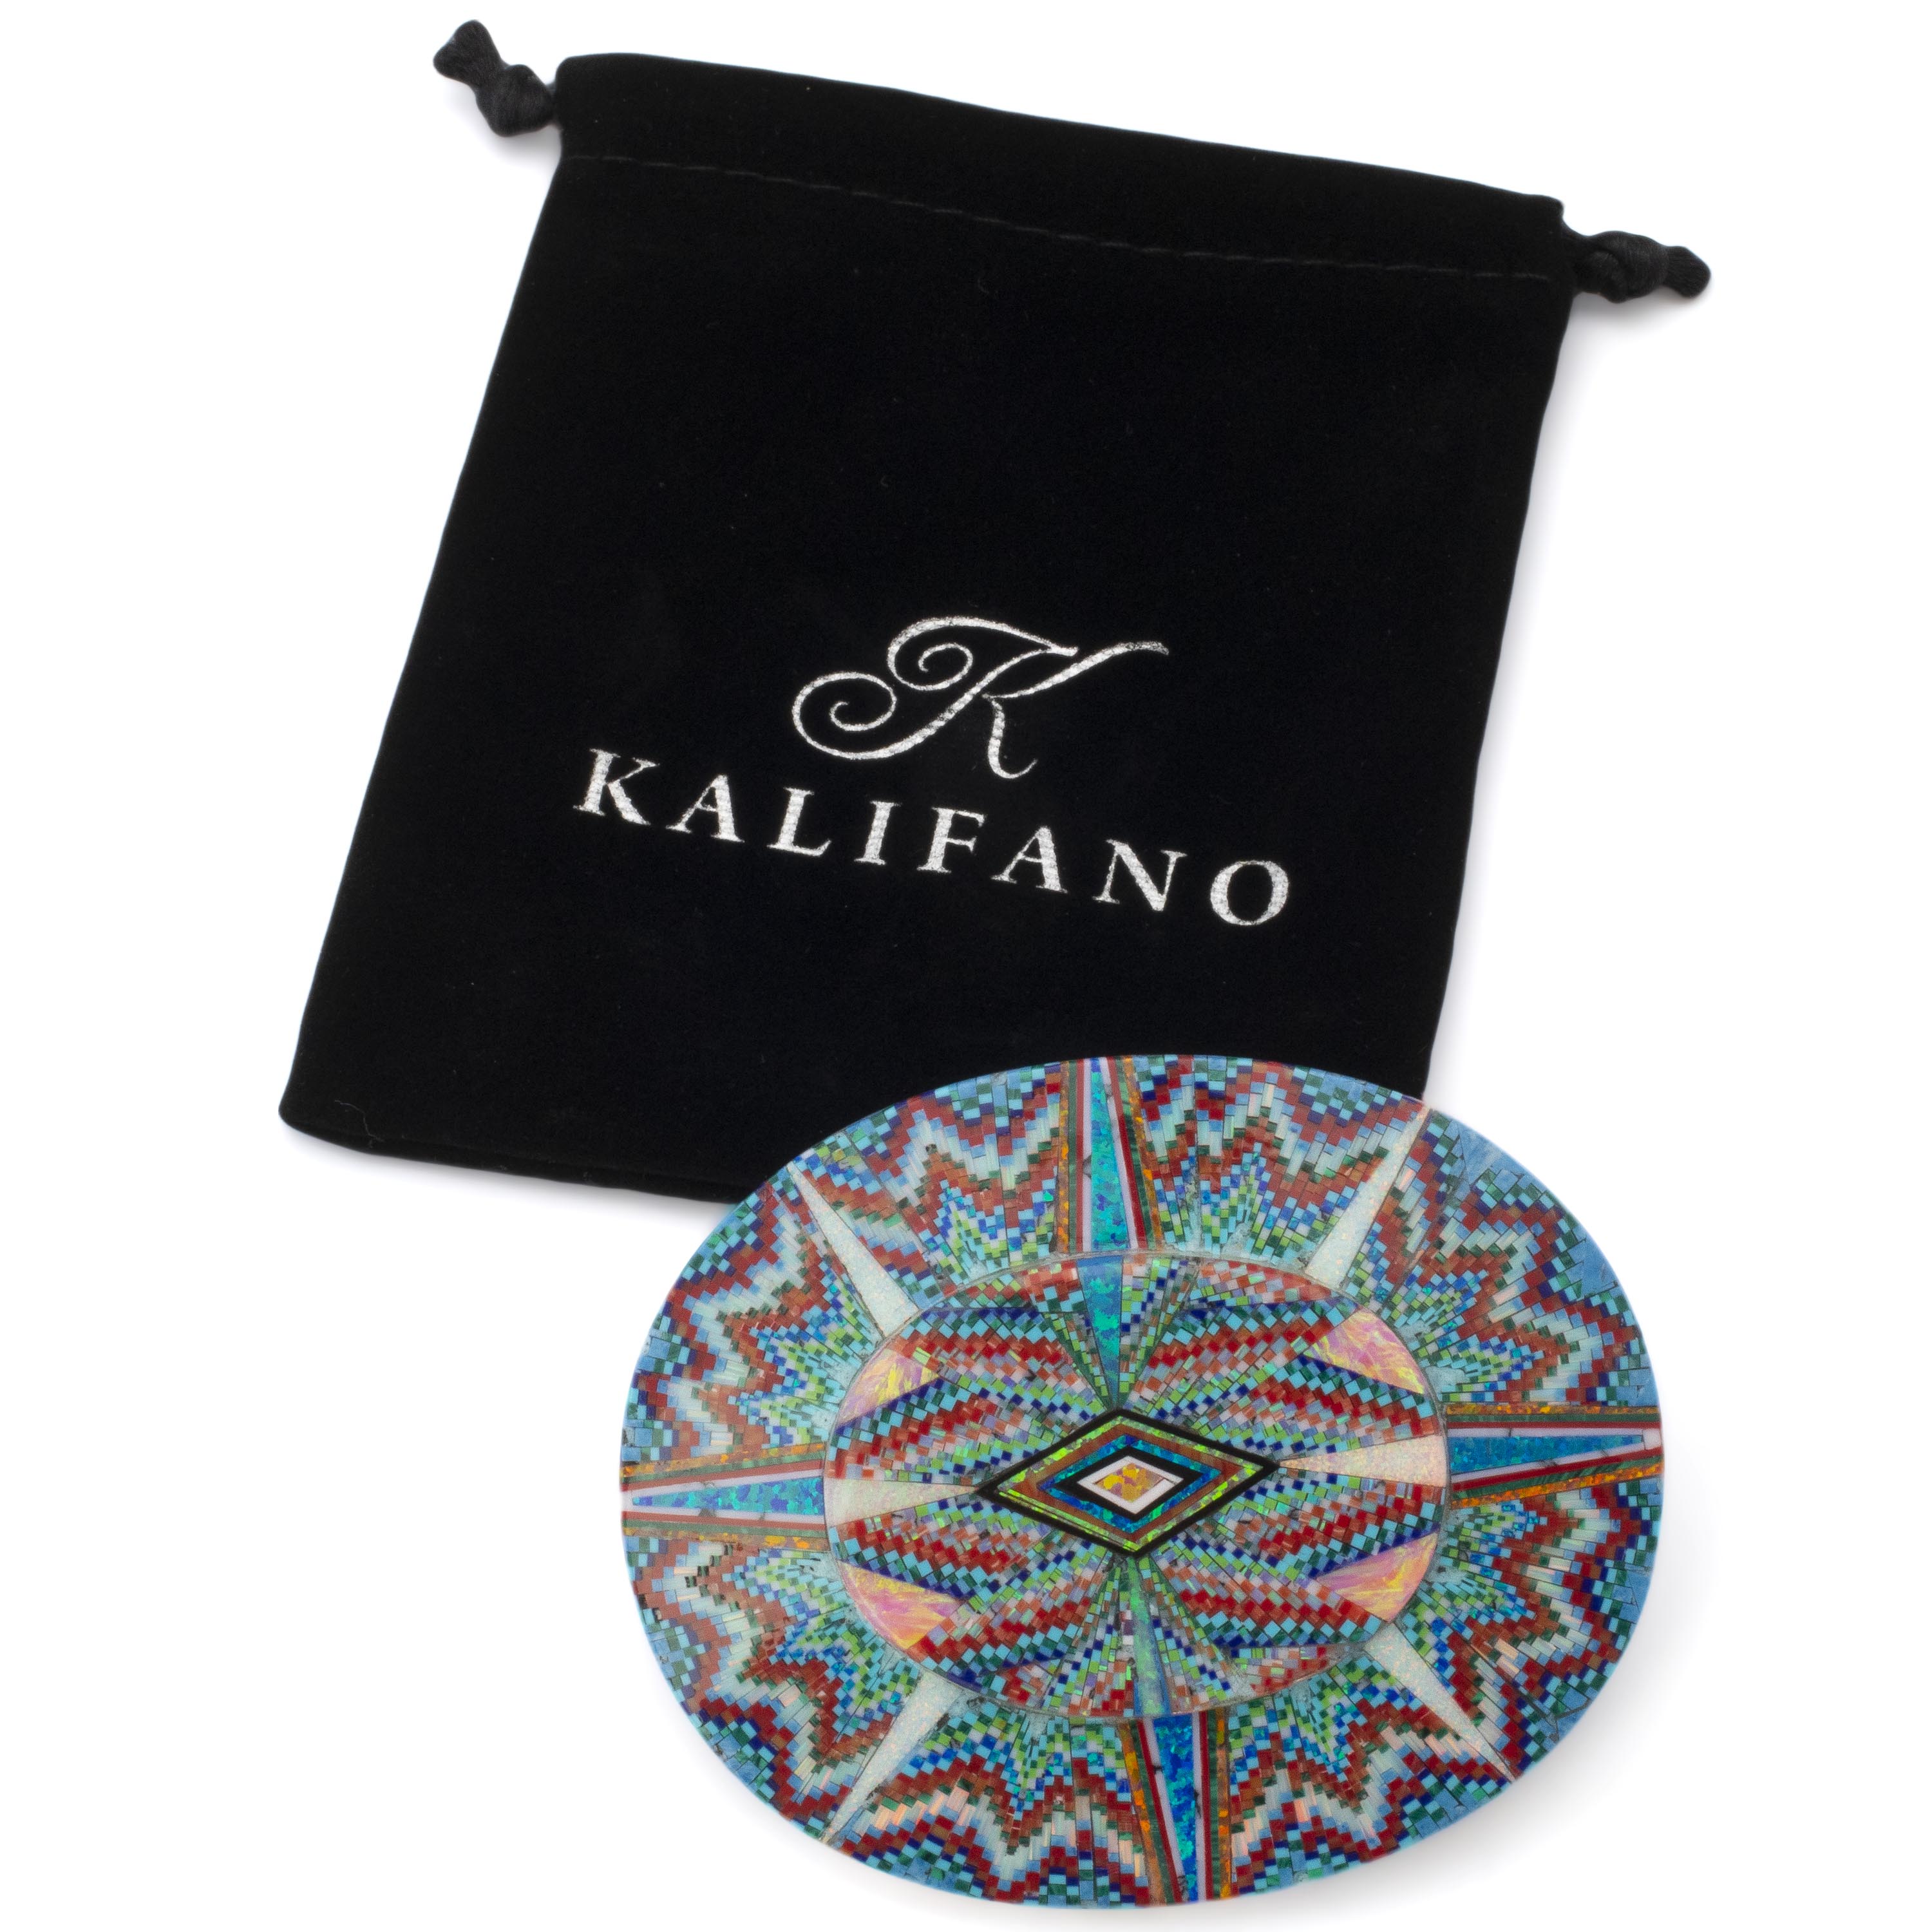 KALIFANO Southwest Silver Jewelry Multi Gem Opal Micro Inlay with Genuine Turquoise and Coral Handmade 925 Sterling Silver Oval Belt Buckle AKBB1800.003